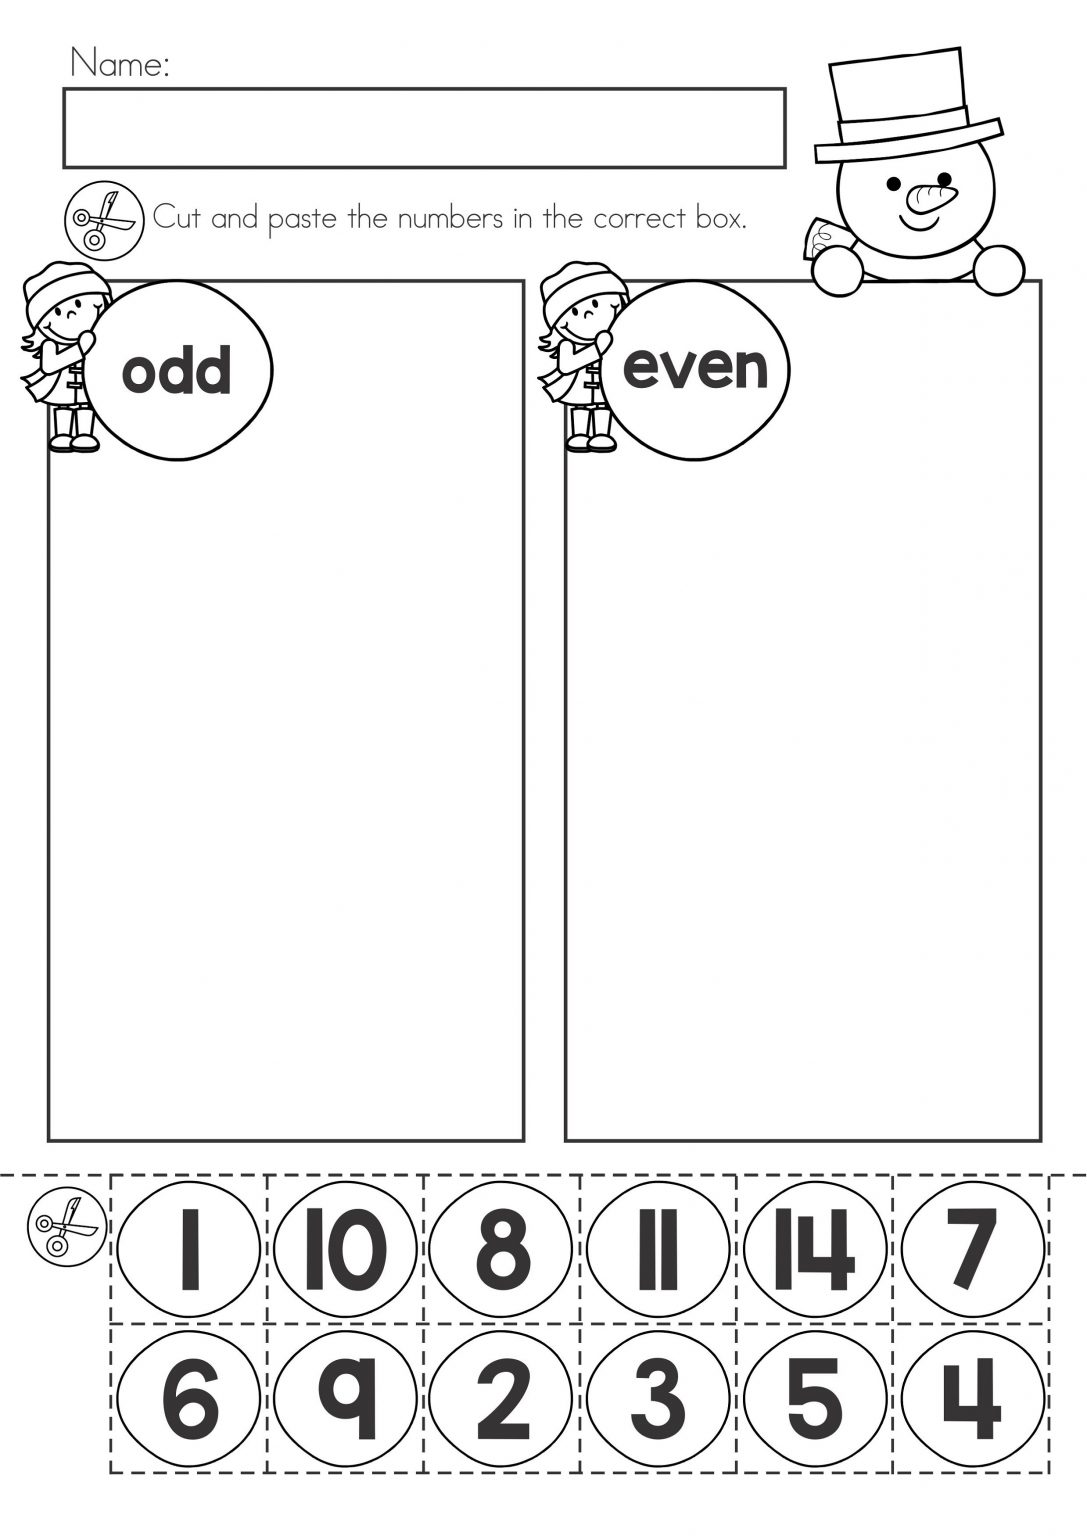 even-and-odd-number-worksheets-101-activity